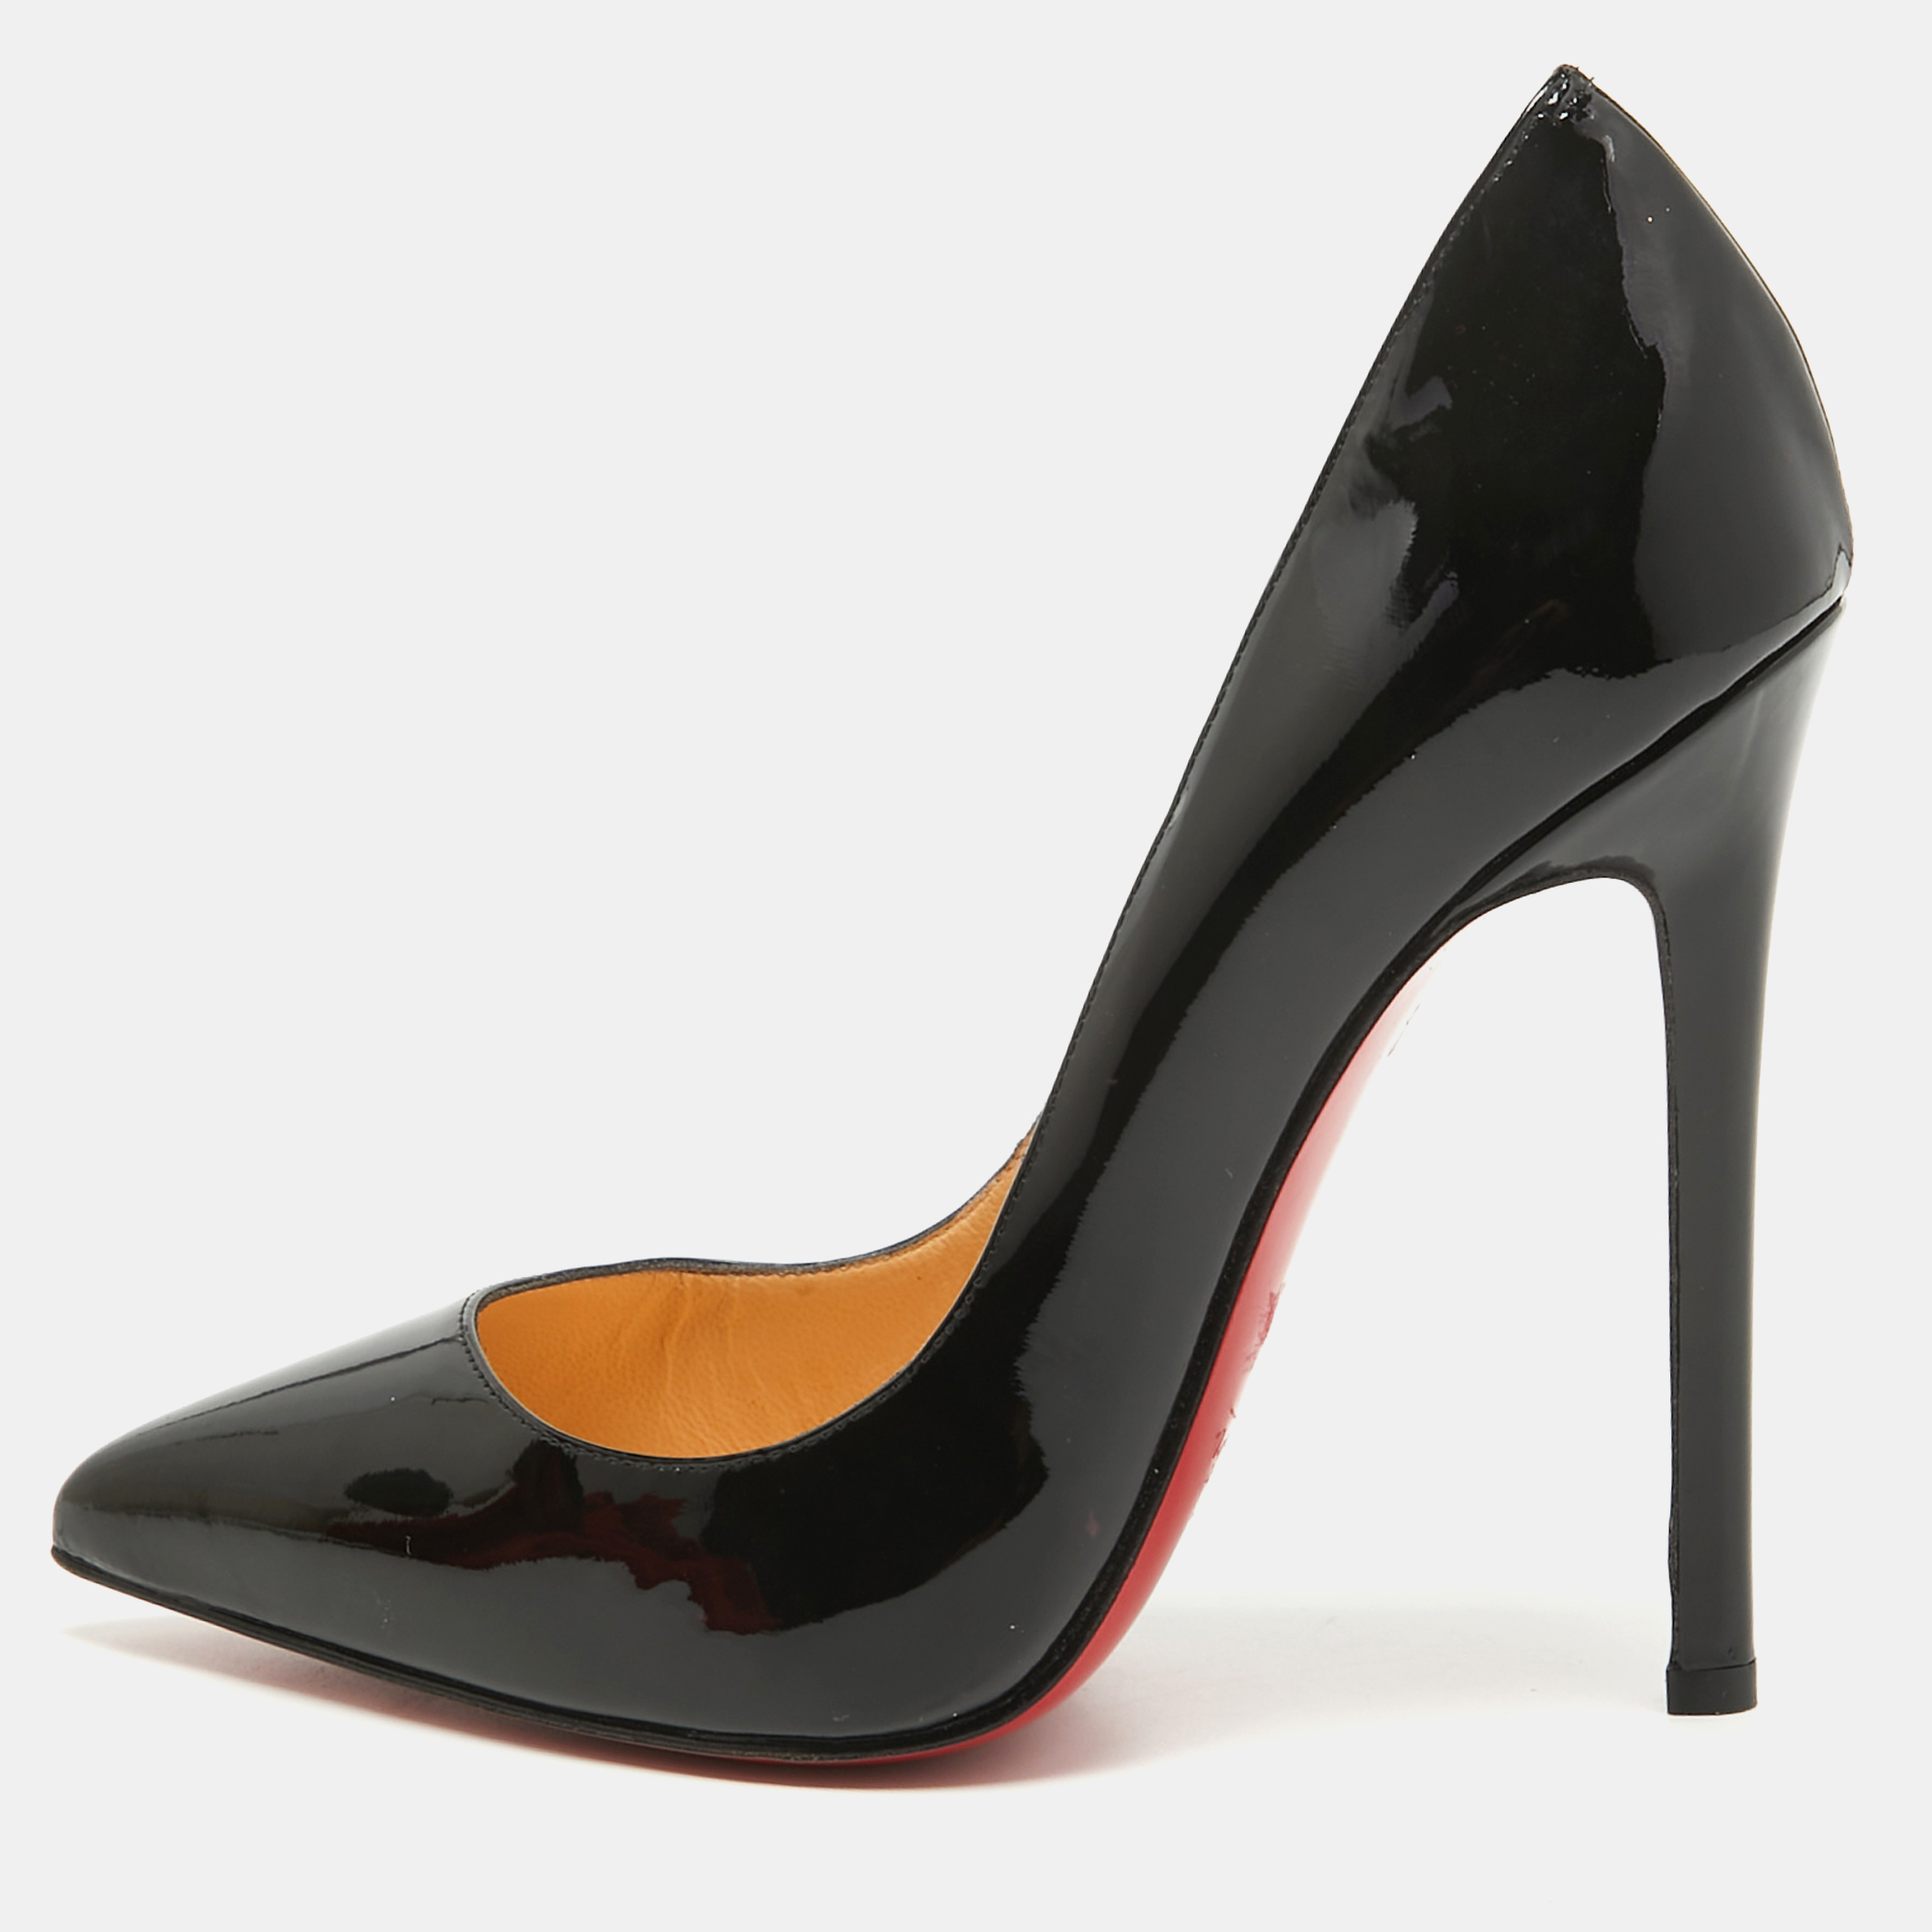 Pre-owned Christian Louboutin Black Patent Leather Pigalle Pumps Size 37